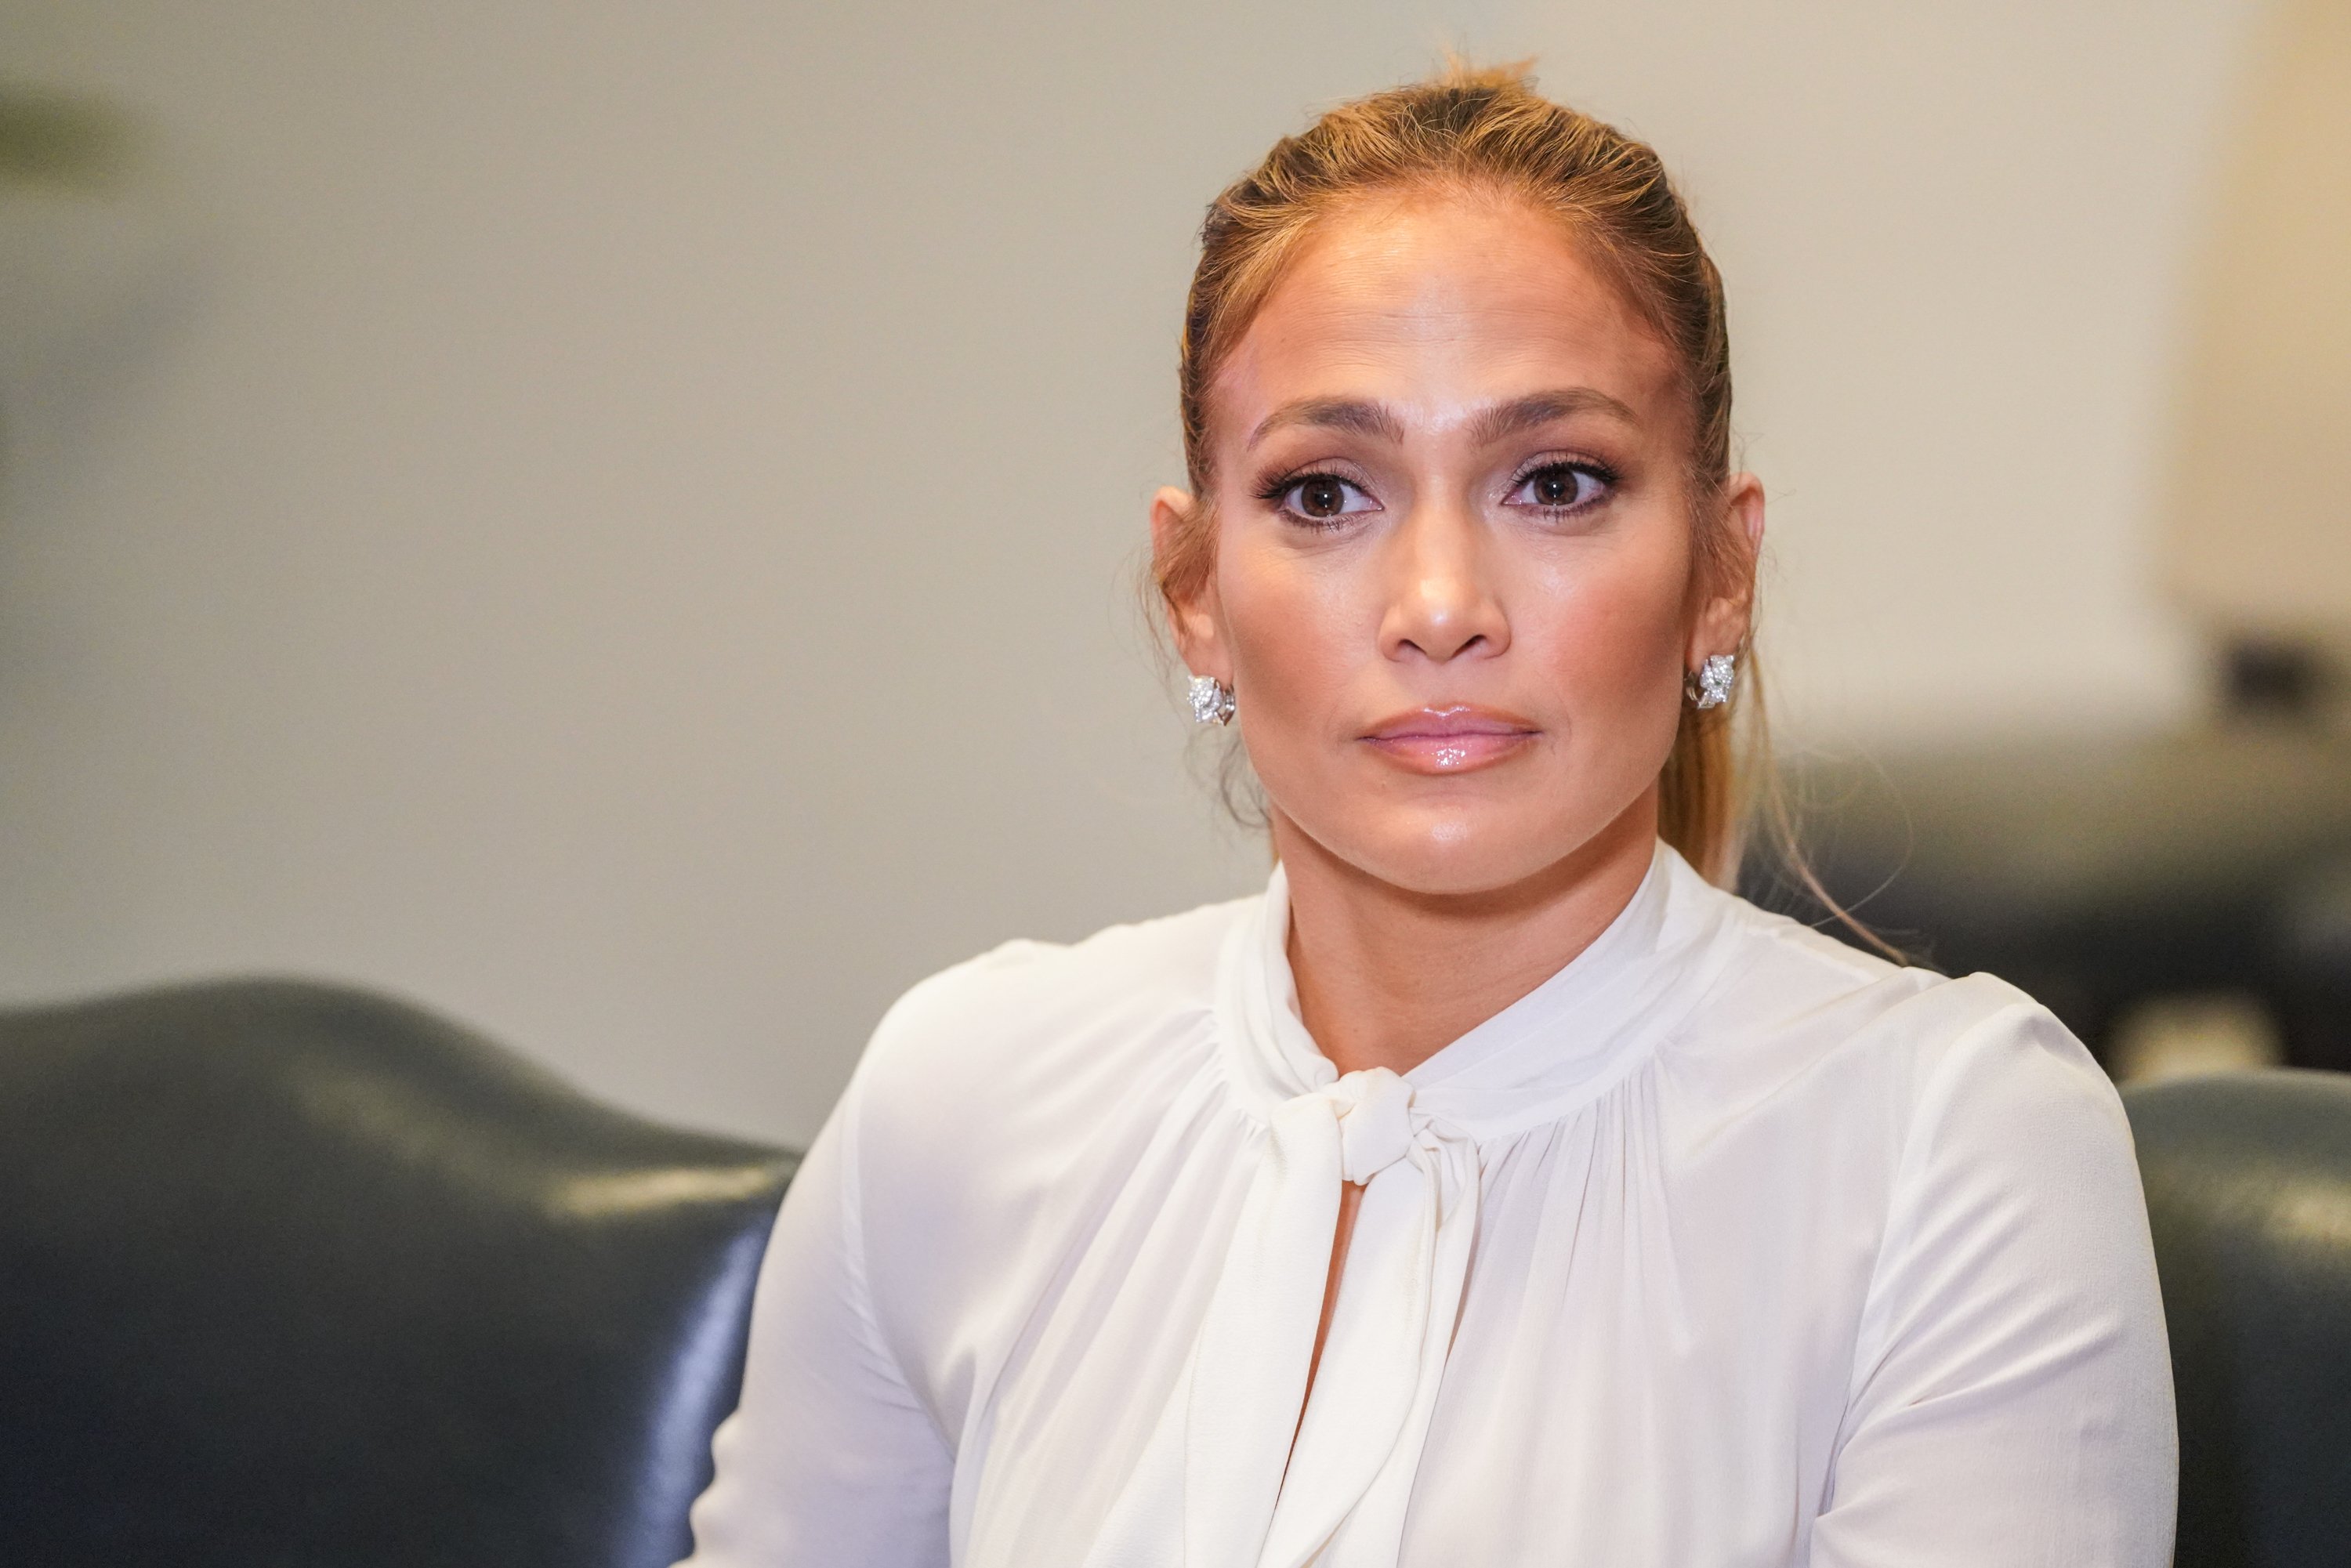 Jennifer Lopez attends "Project Destined" Yankees Shark Tank Presentations at Yankee Stadium on March 4, 2018 in New York City | Photo: Getty Images